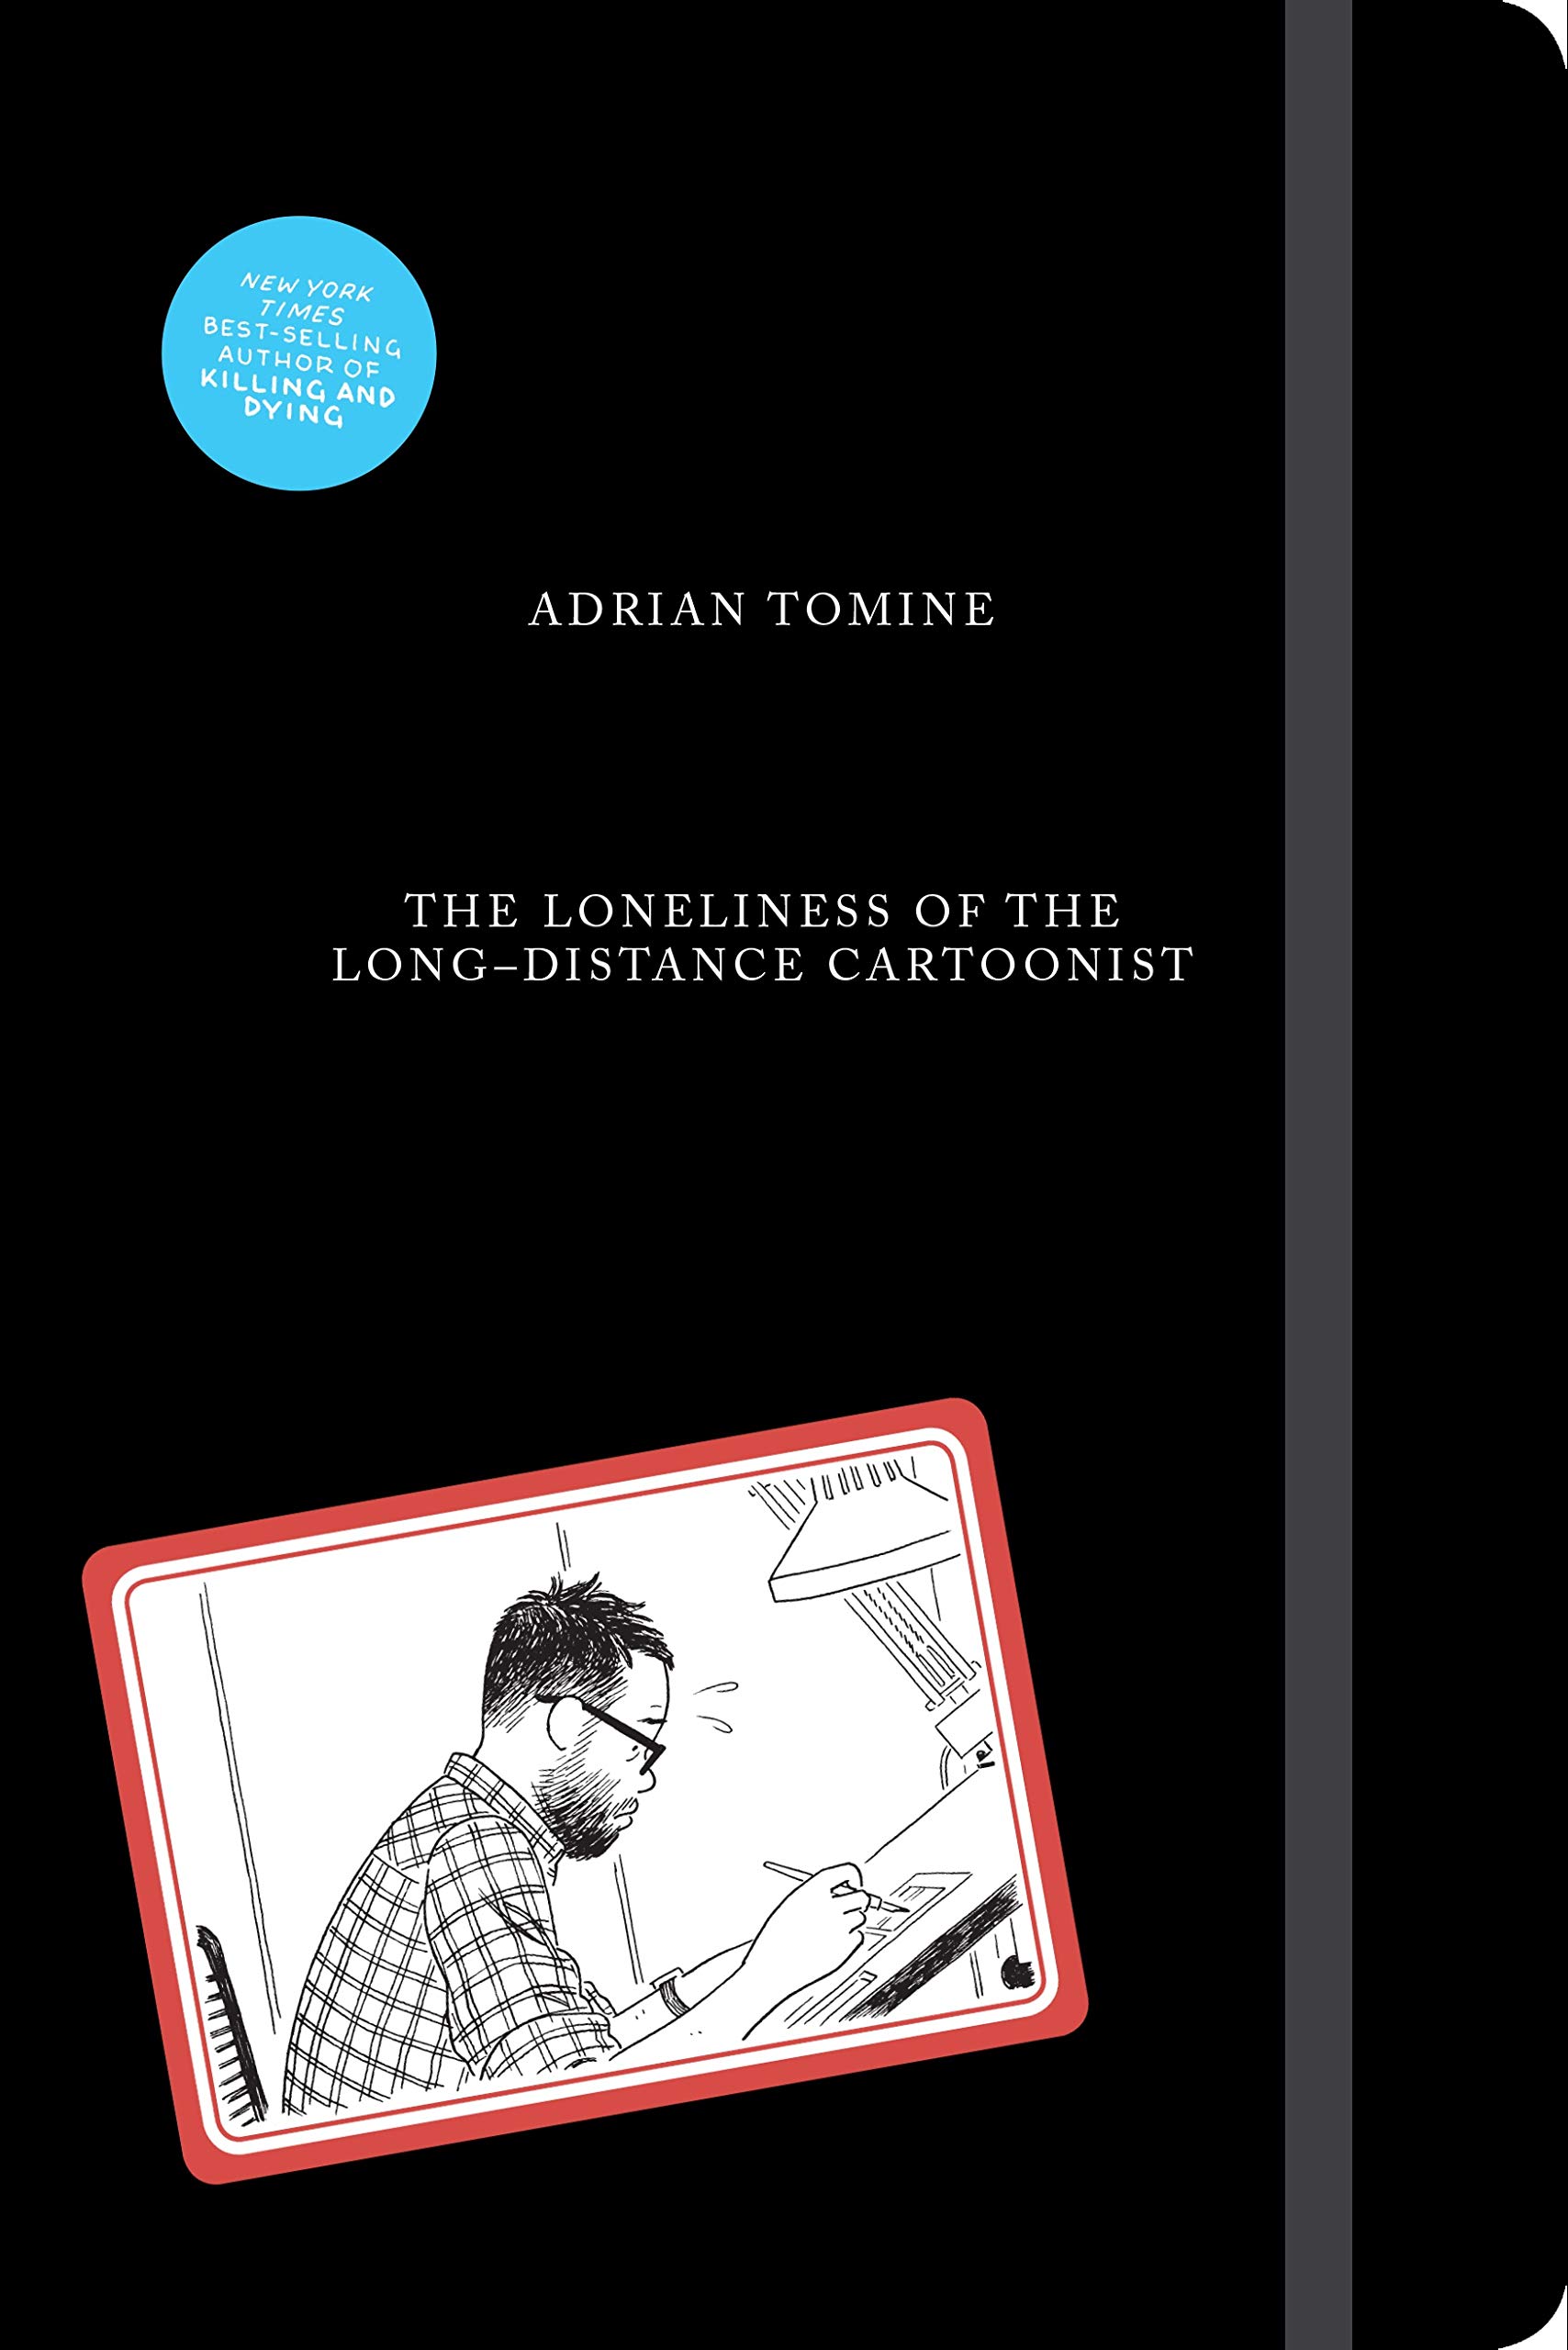 The Loneliness of the Long-Distance Cartoonist by Adrian Tomine